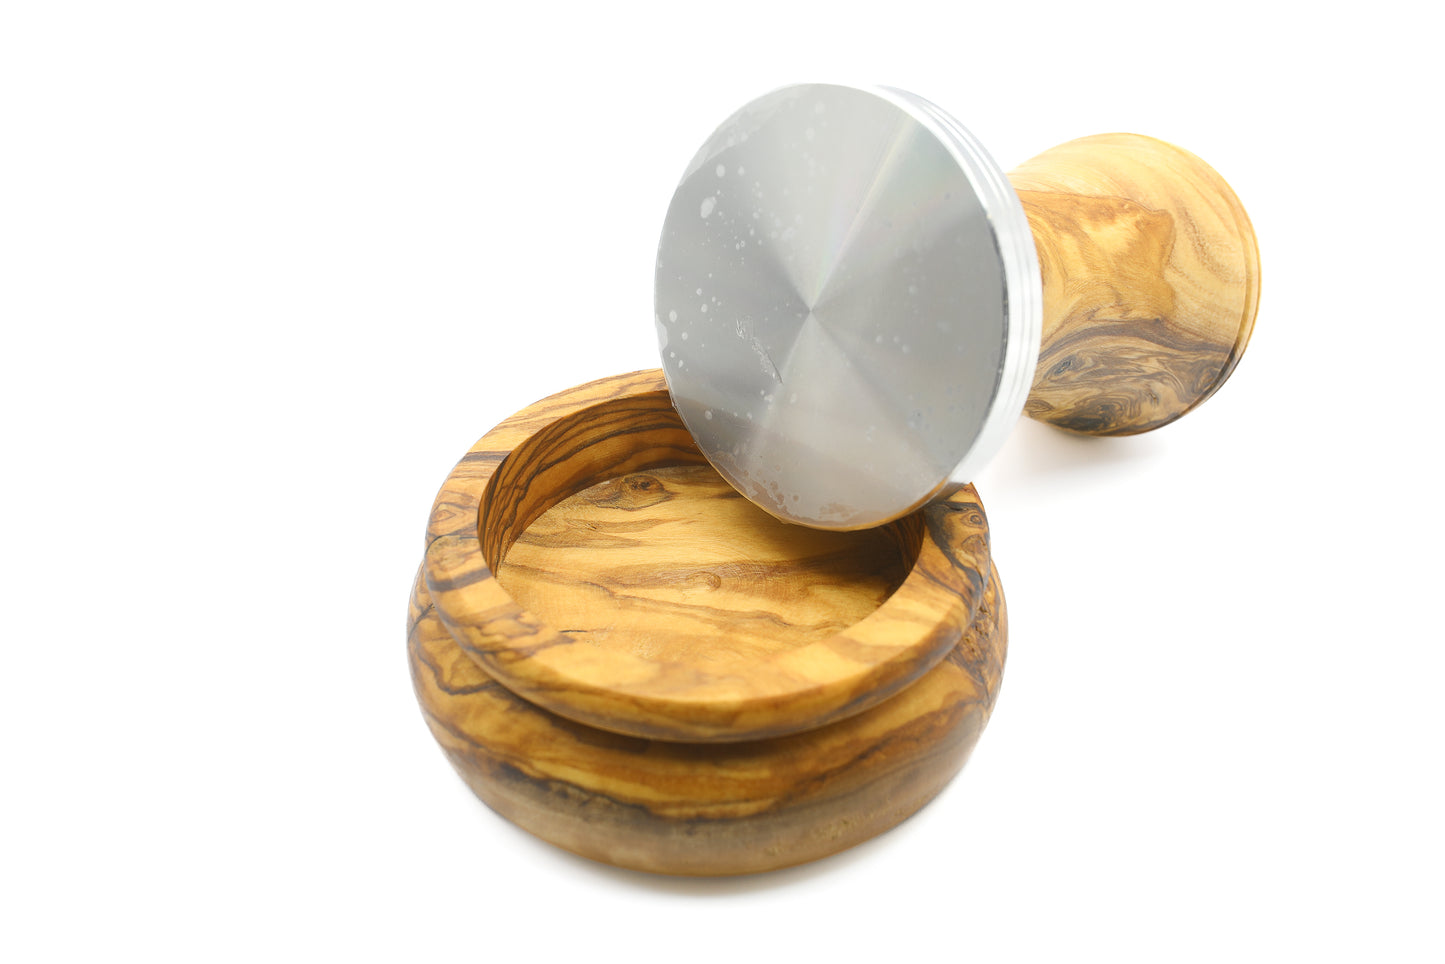 Hand-finished coffee tamper with a holder, made from olive wood and stainless steel